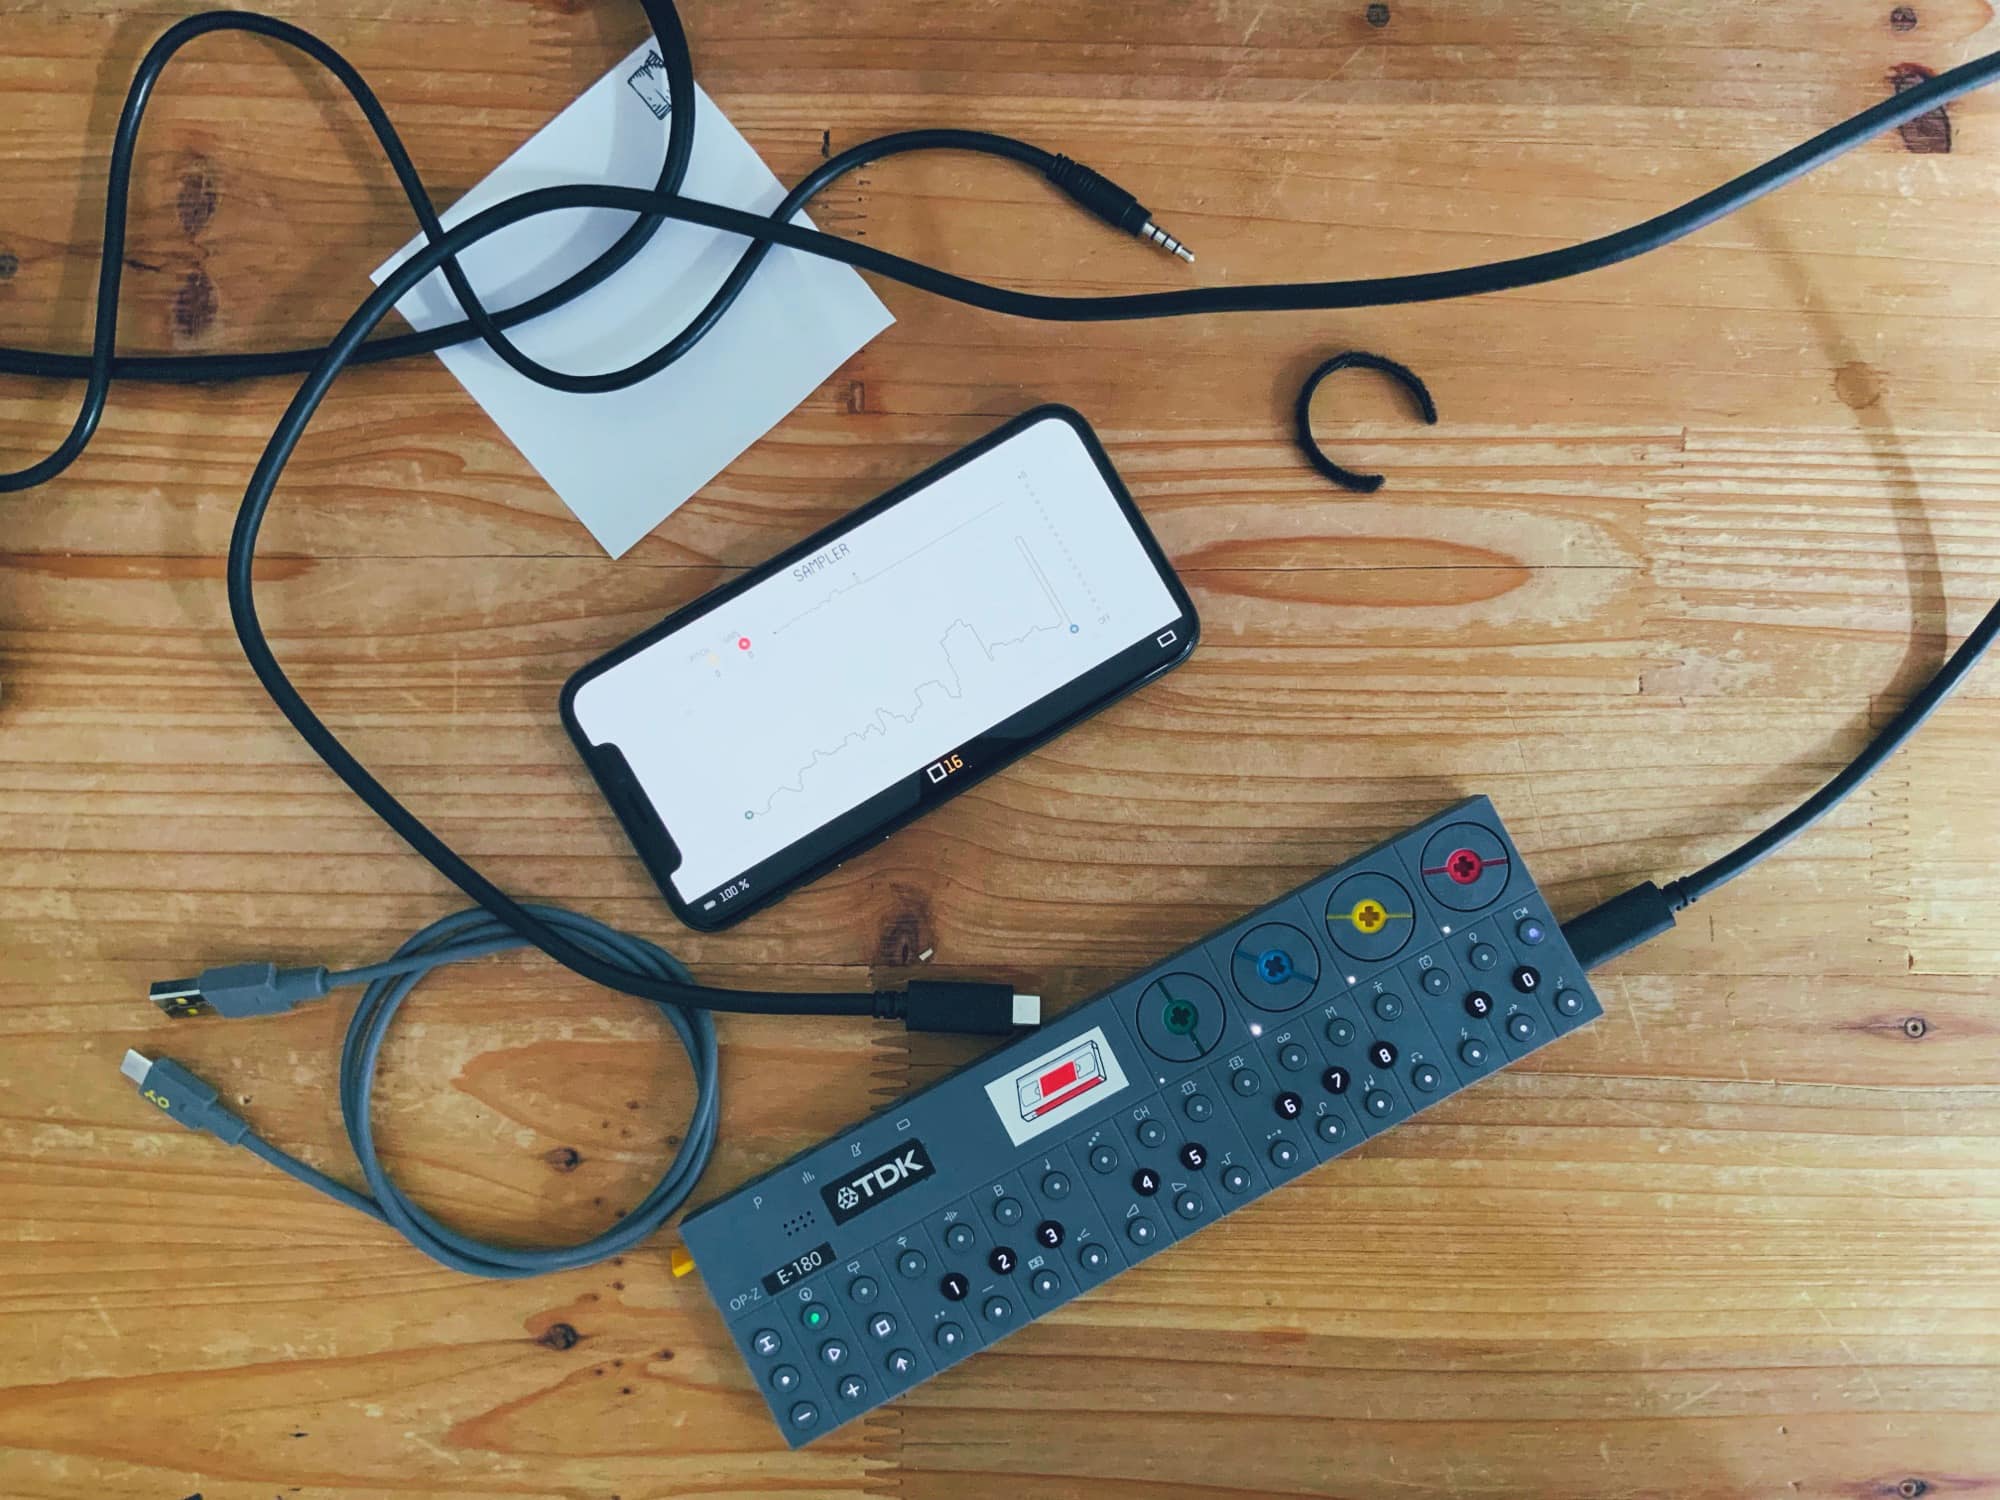 This is all you need to make a hit record. Well, maybe a few dongles, too…